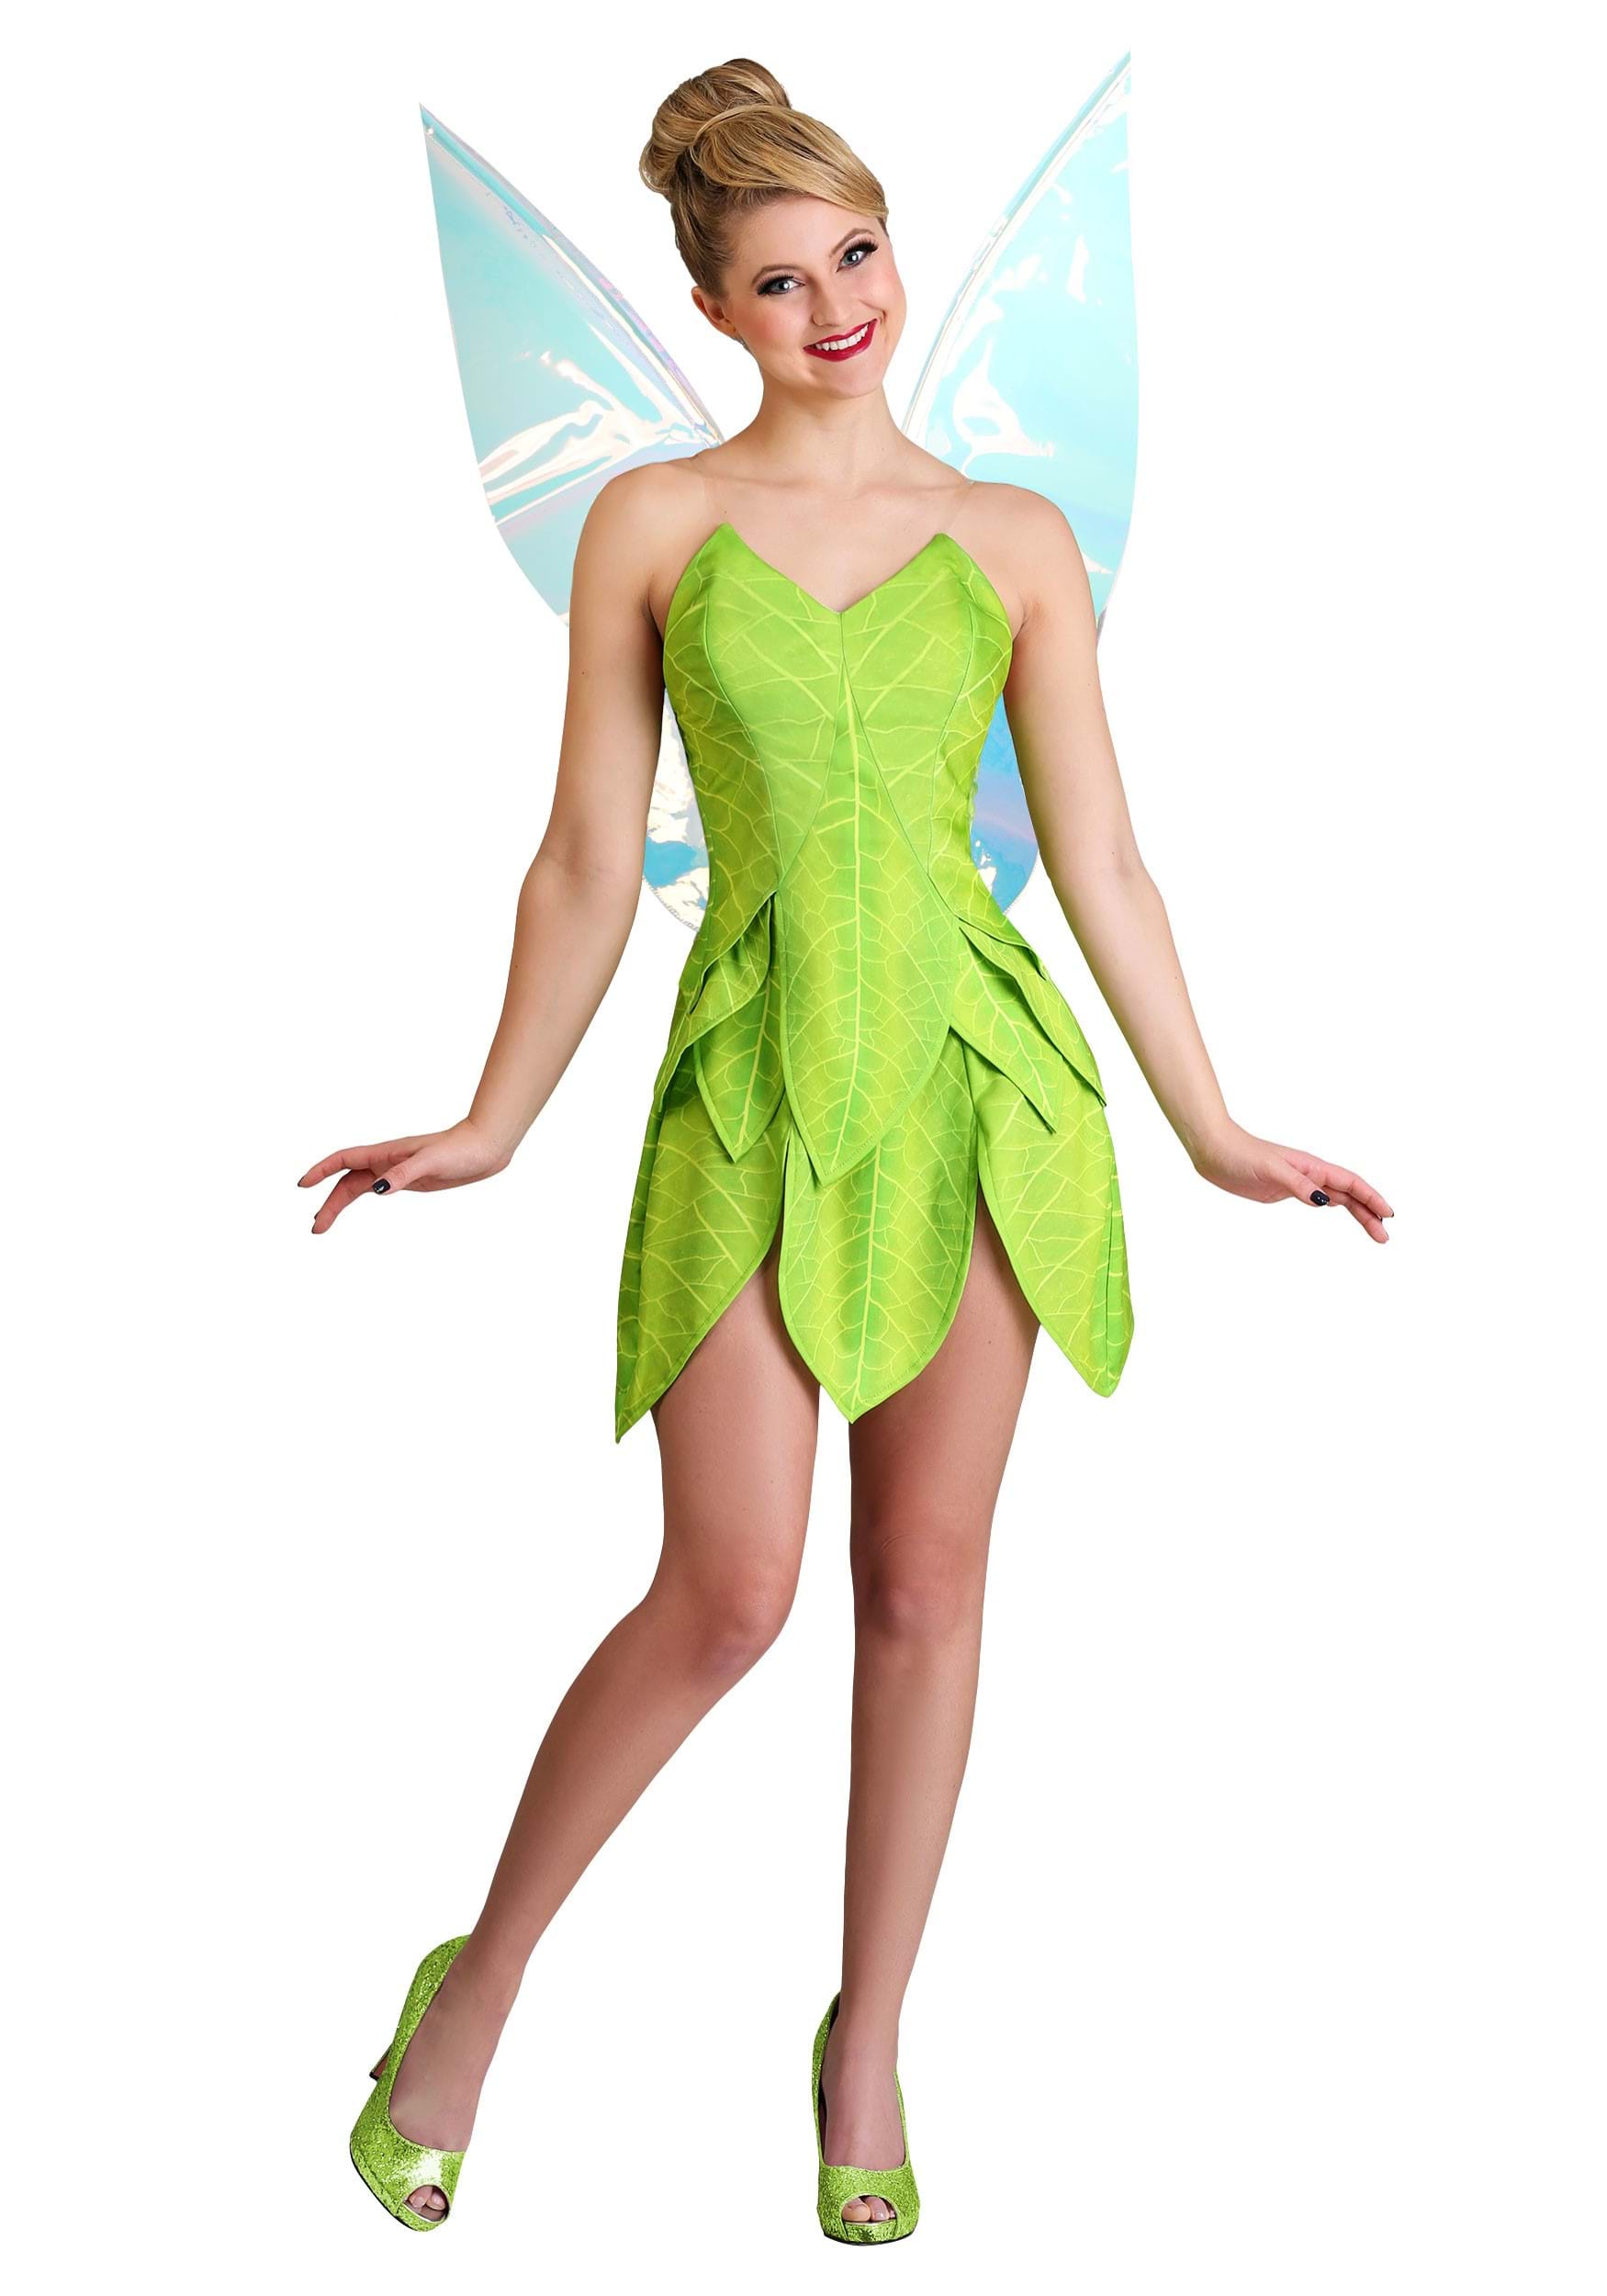 https://images.halloweencostumes.com/products/44360/1-1/adults-fairytale-tink-costume-2.jpg